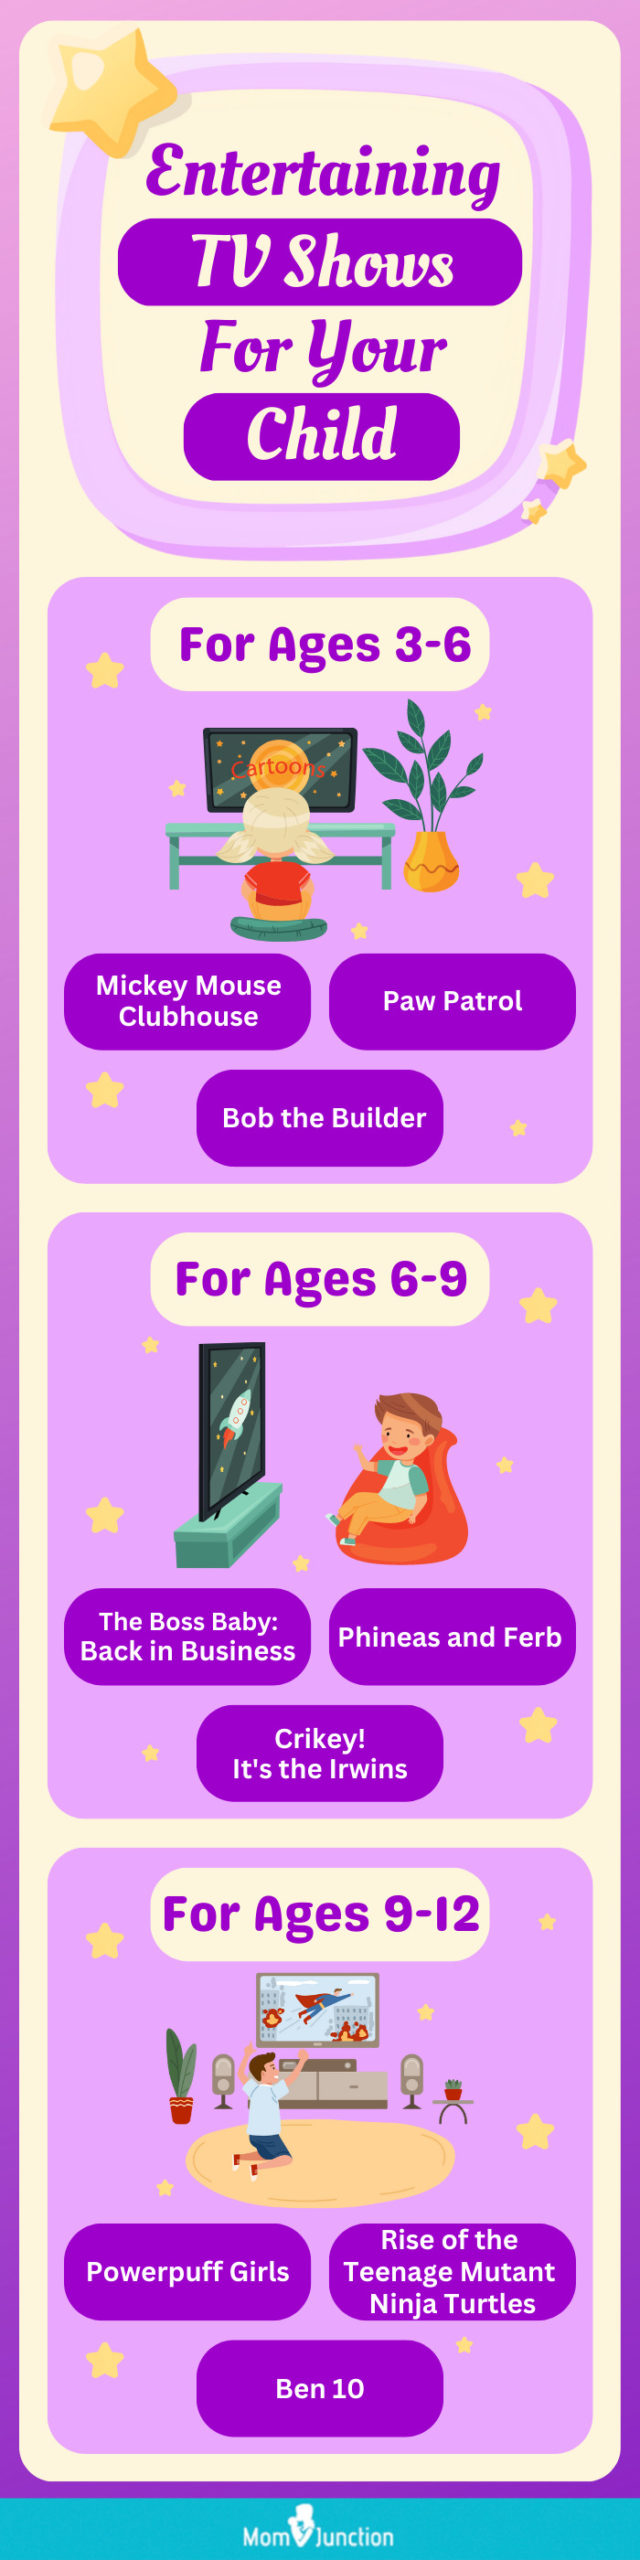 tv shows for children (infographic)